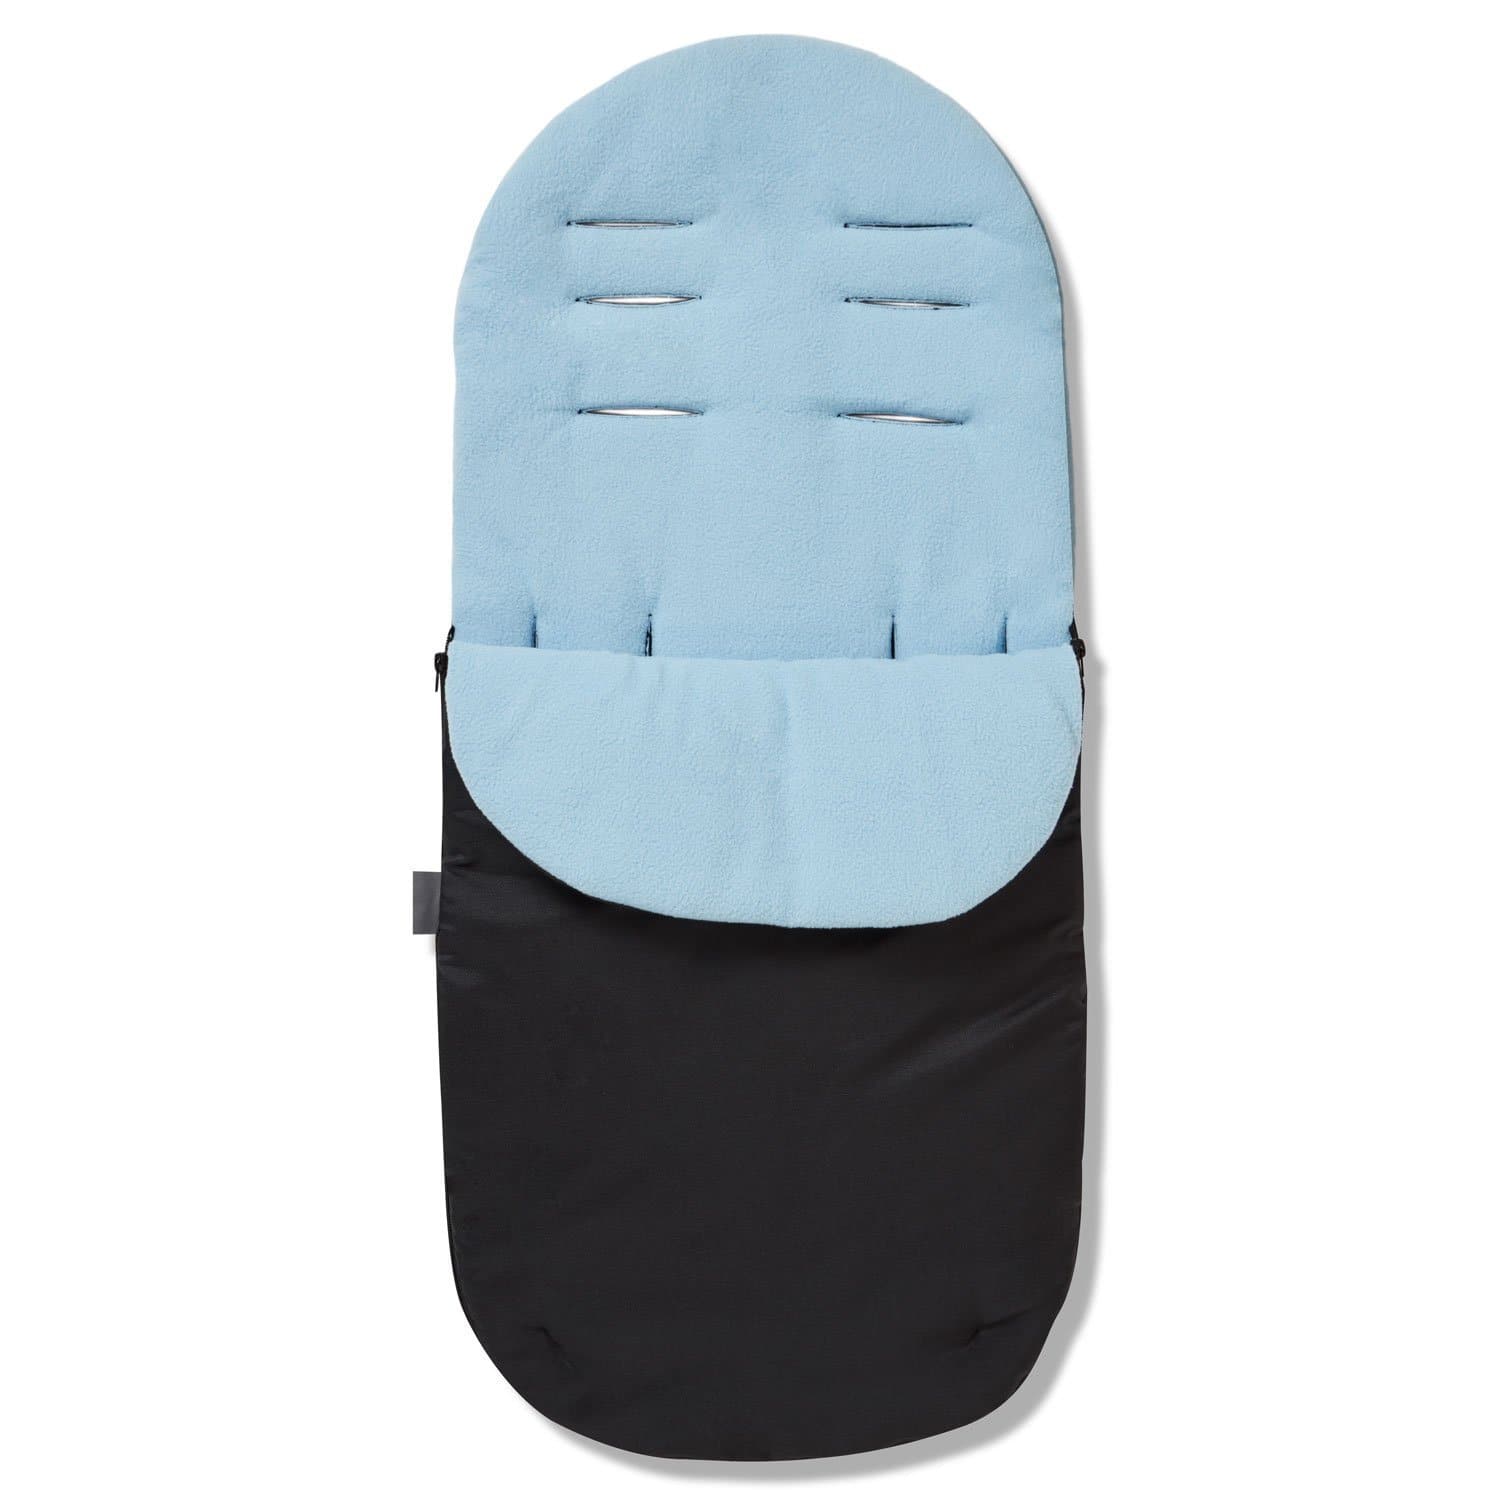 Footmuff / Cosy Toes Compatible with Kiddicare.com - For Your Little One